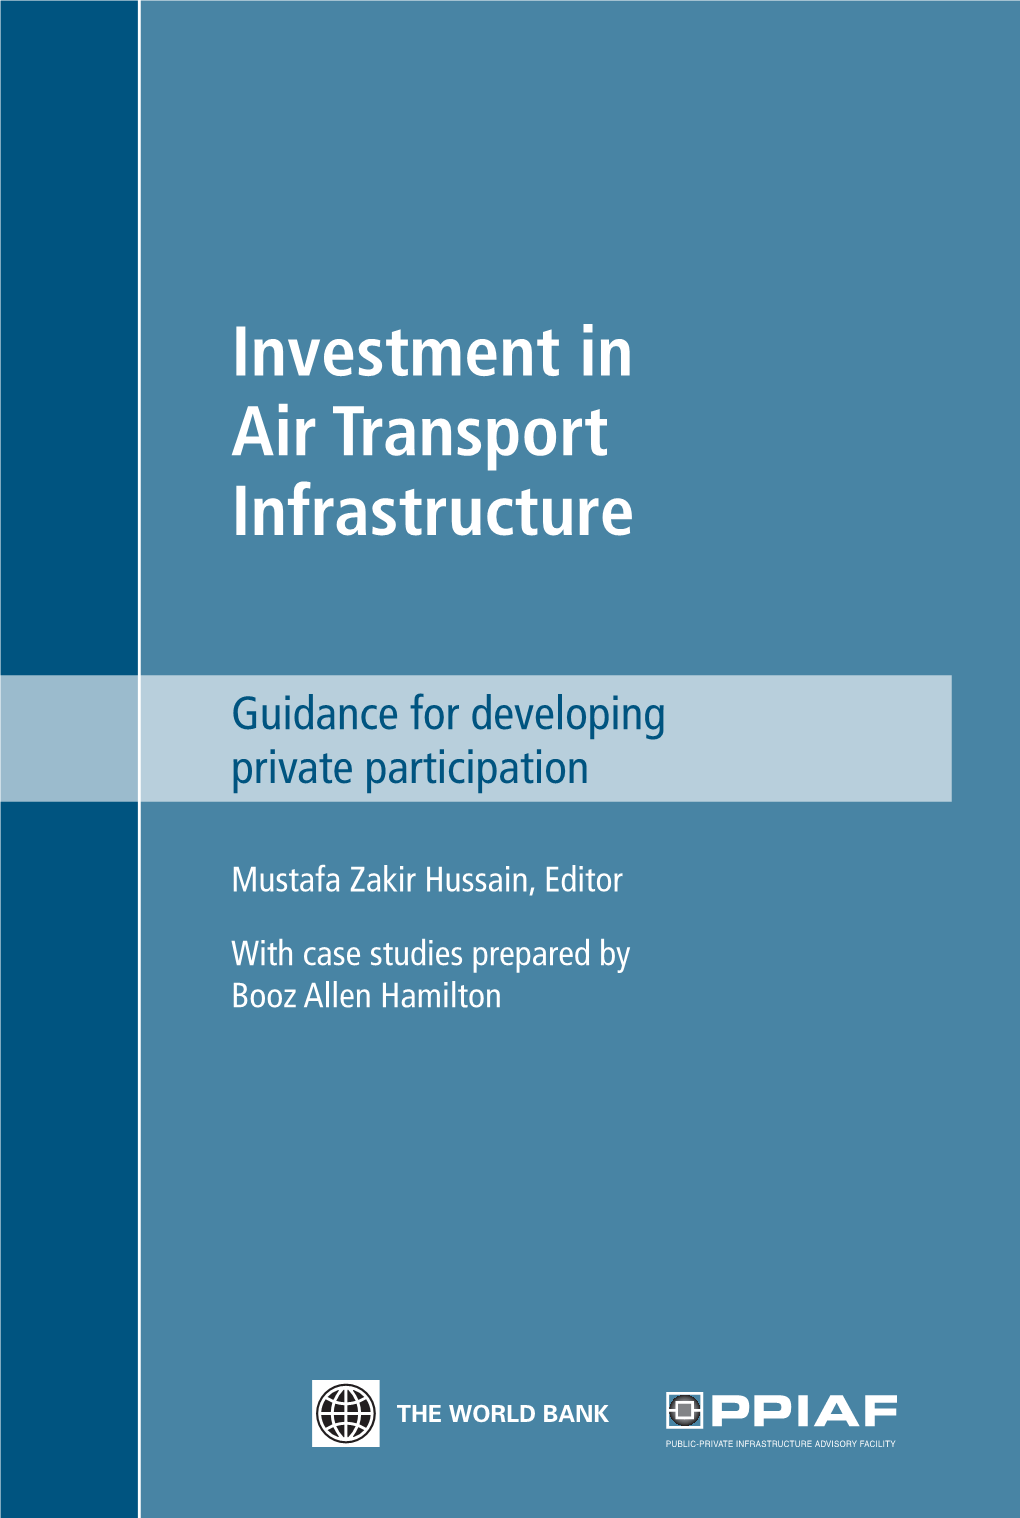 Investment in Air Transport Infrastructure